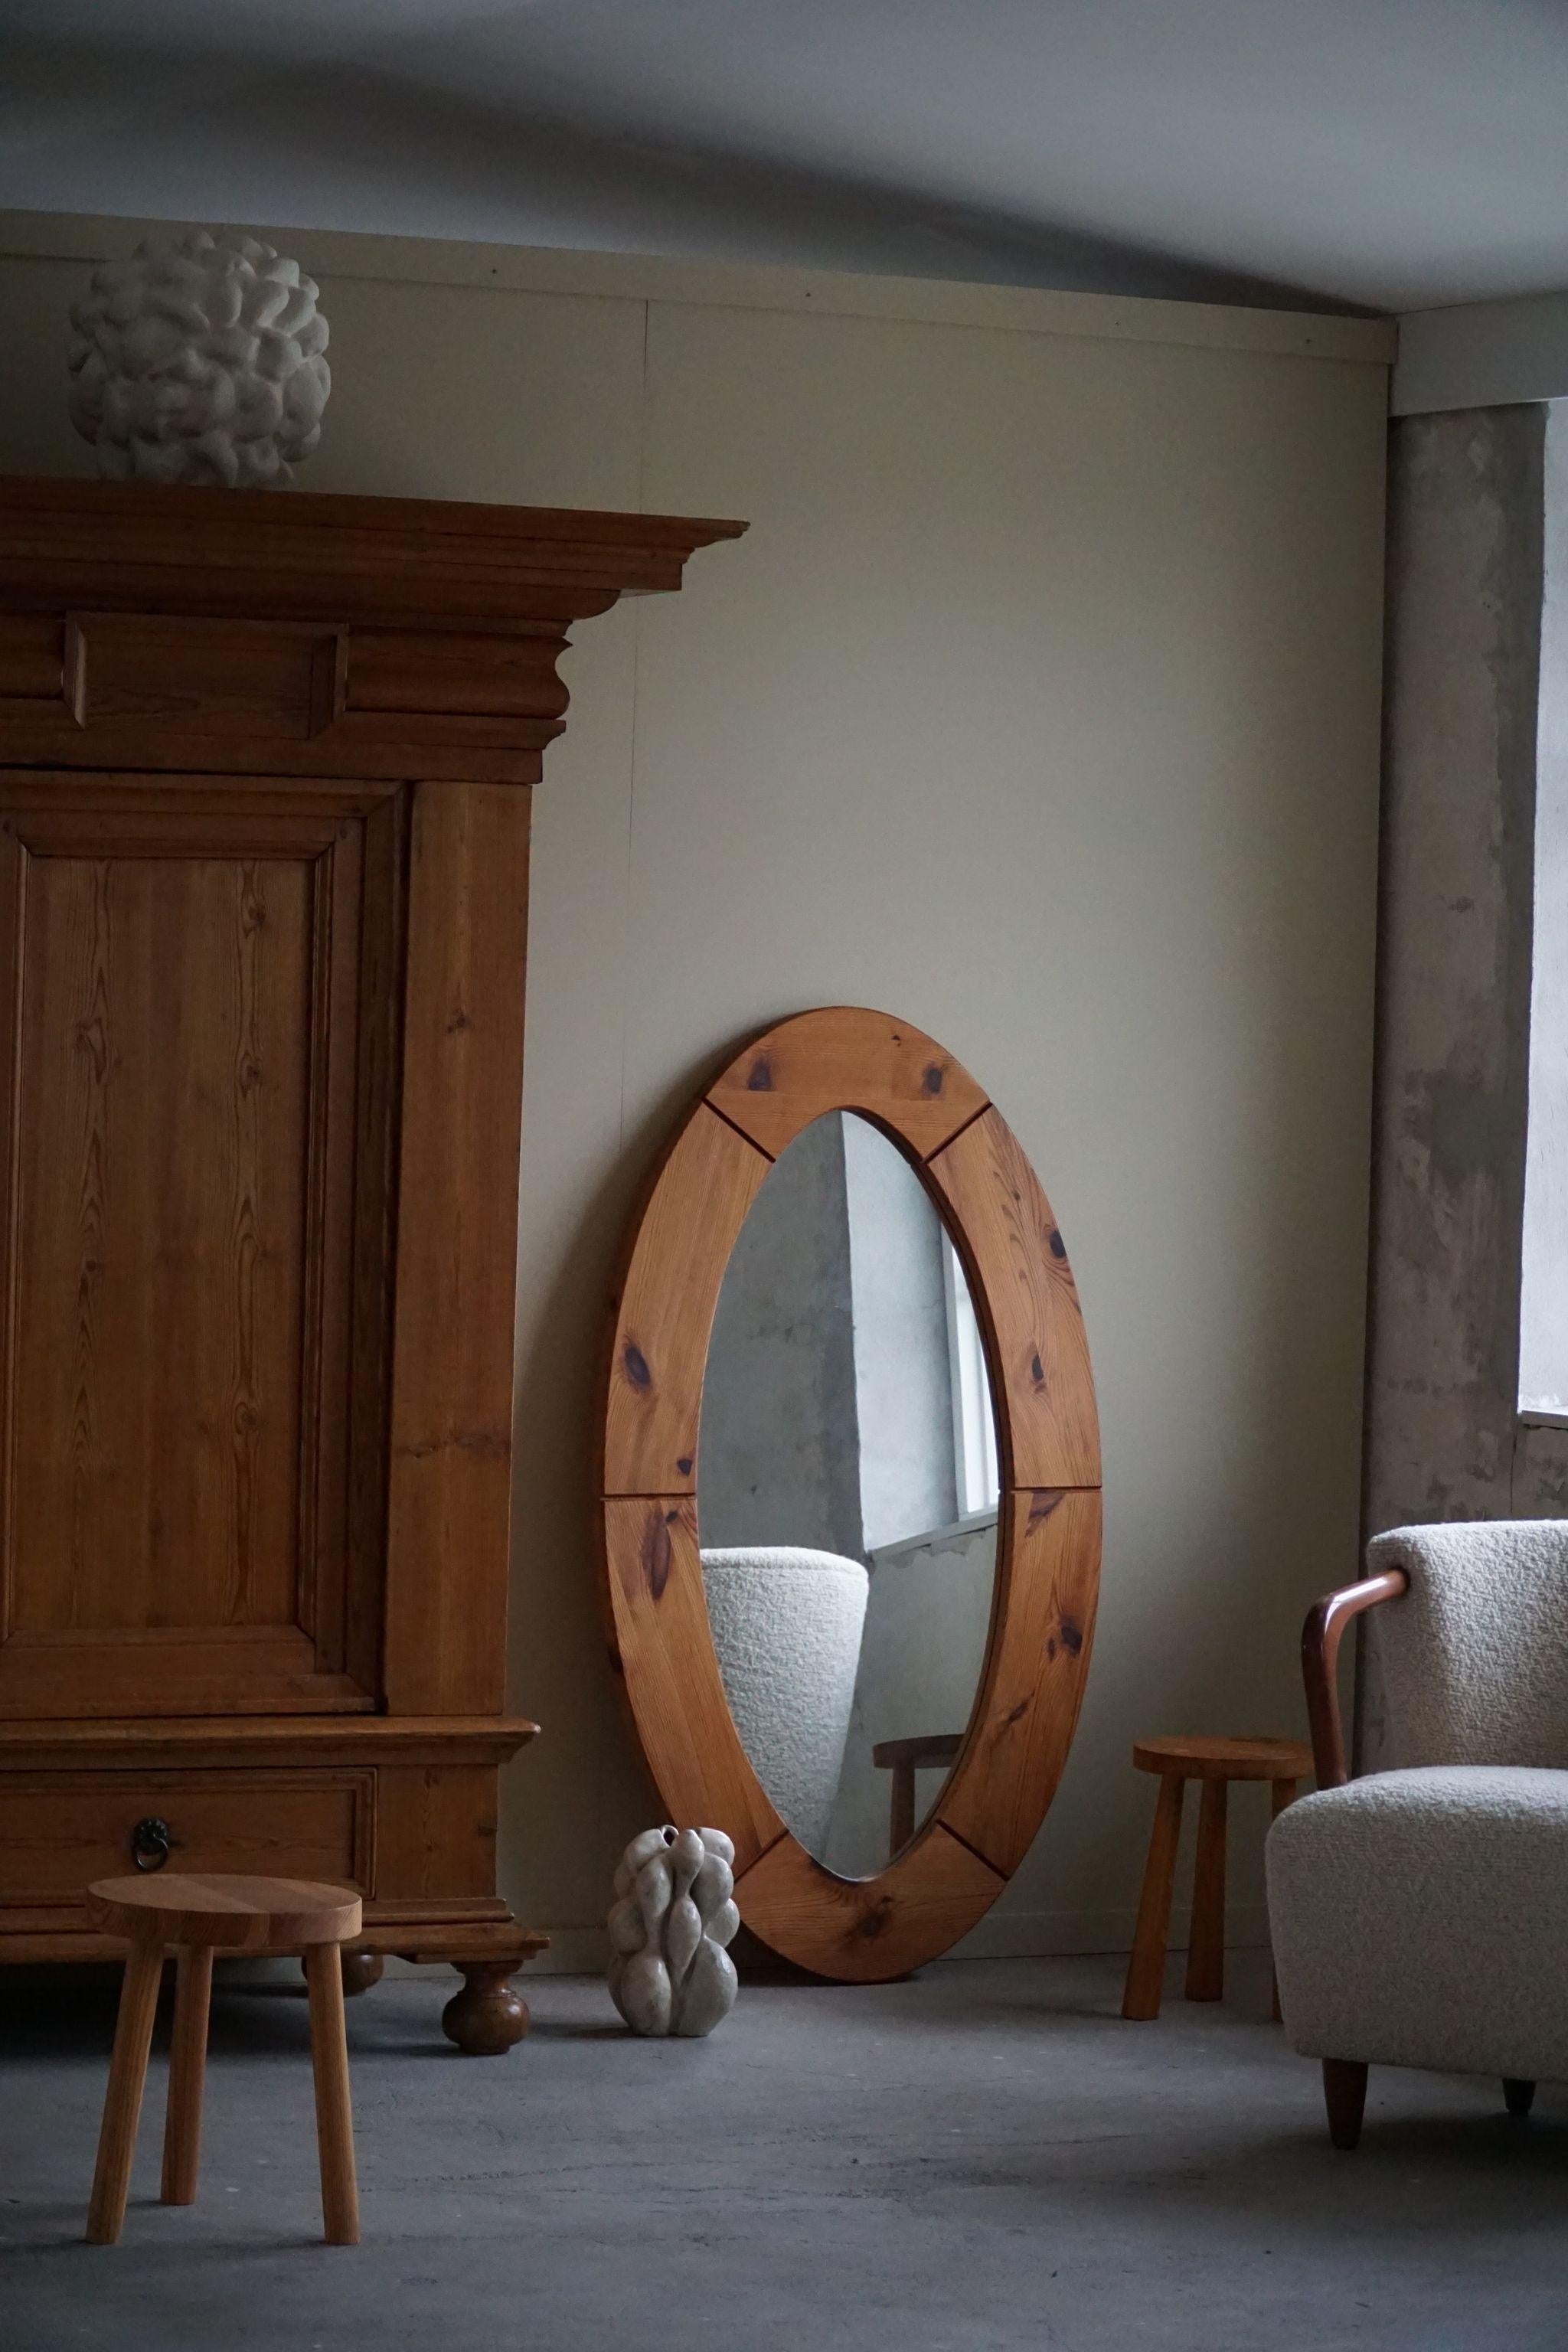 A beautiful large oval wall mirror in solid pine. Made by Glasmäster in Markaryd, Sweden in the 1960s. A decorative object that pairs well with many types of interior styles. A Modern, Scandinavian, Classic or an Art deco home decor.

A warm colour